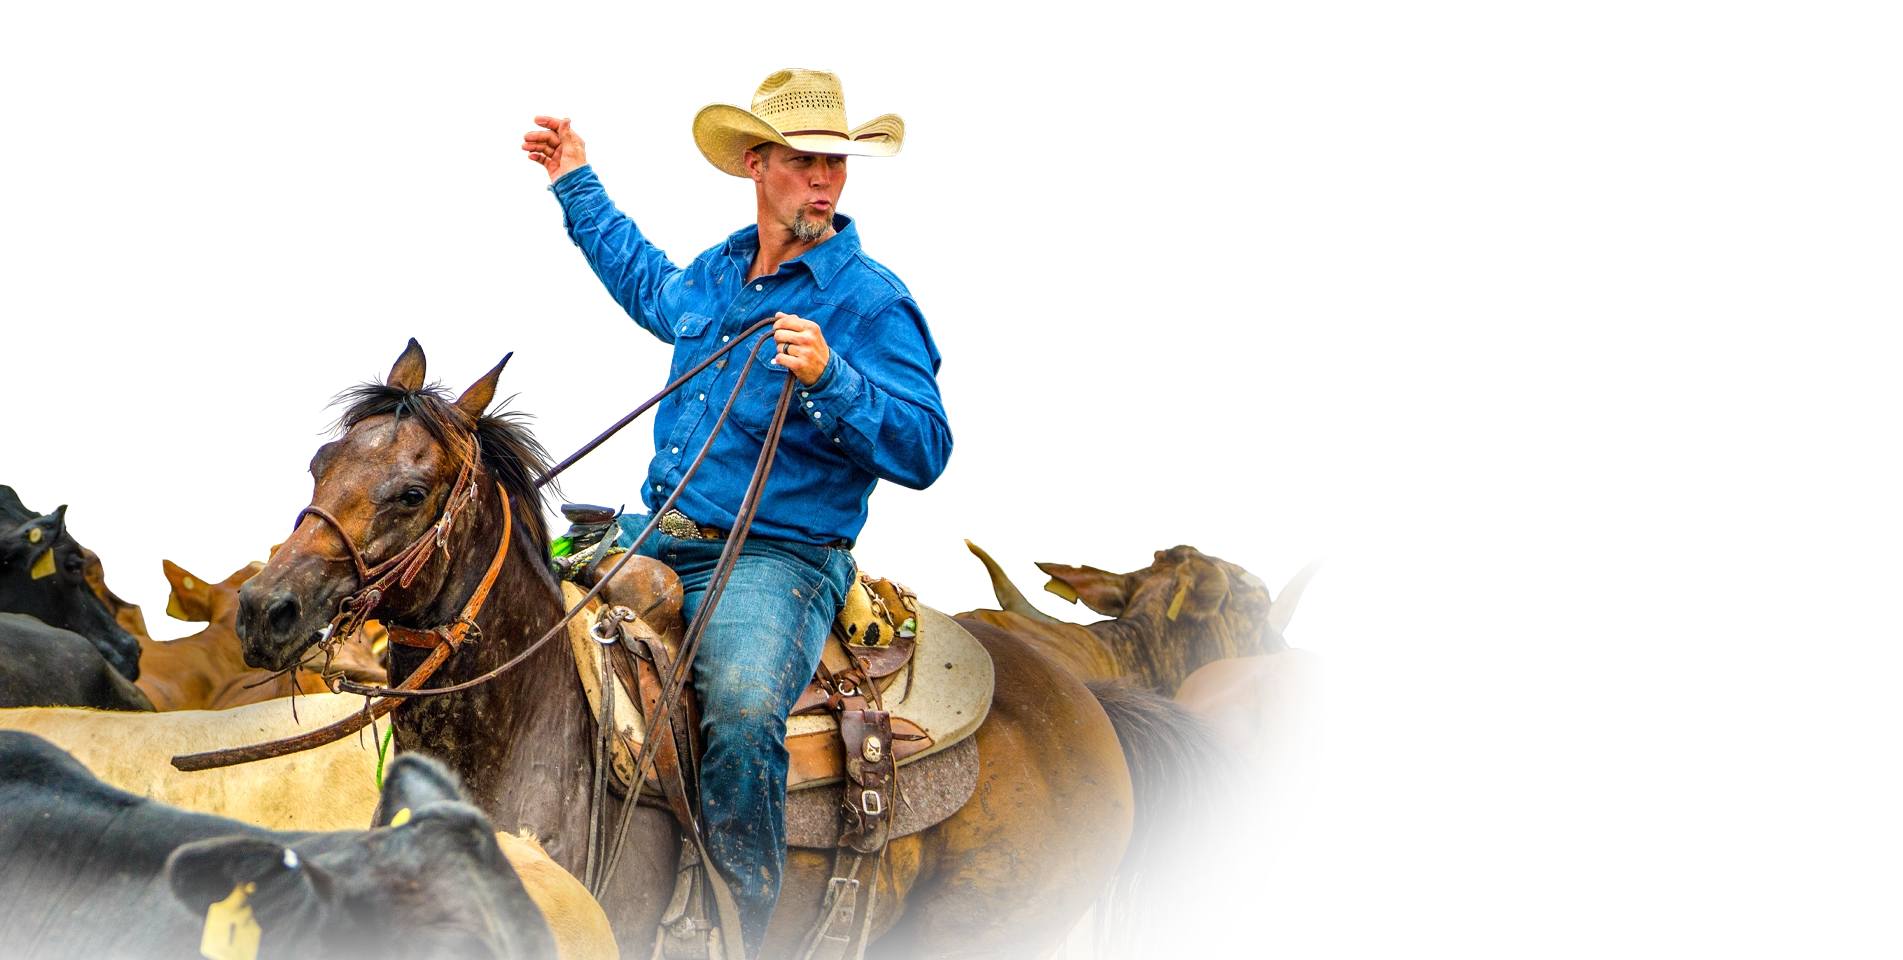 Bubba Thompson riding a horse with his hand extended in the air, and a determined look on his face.